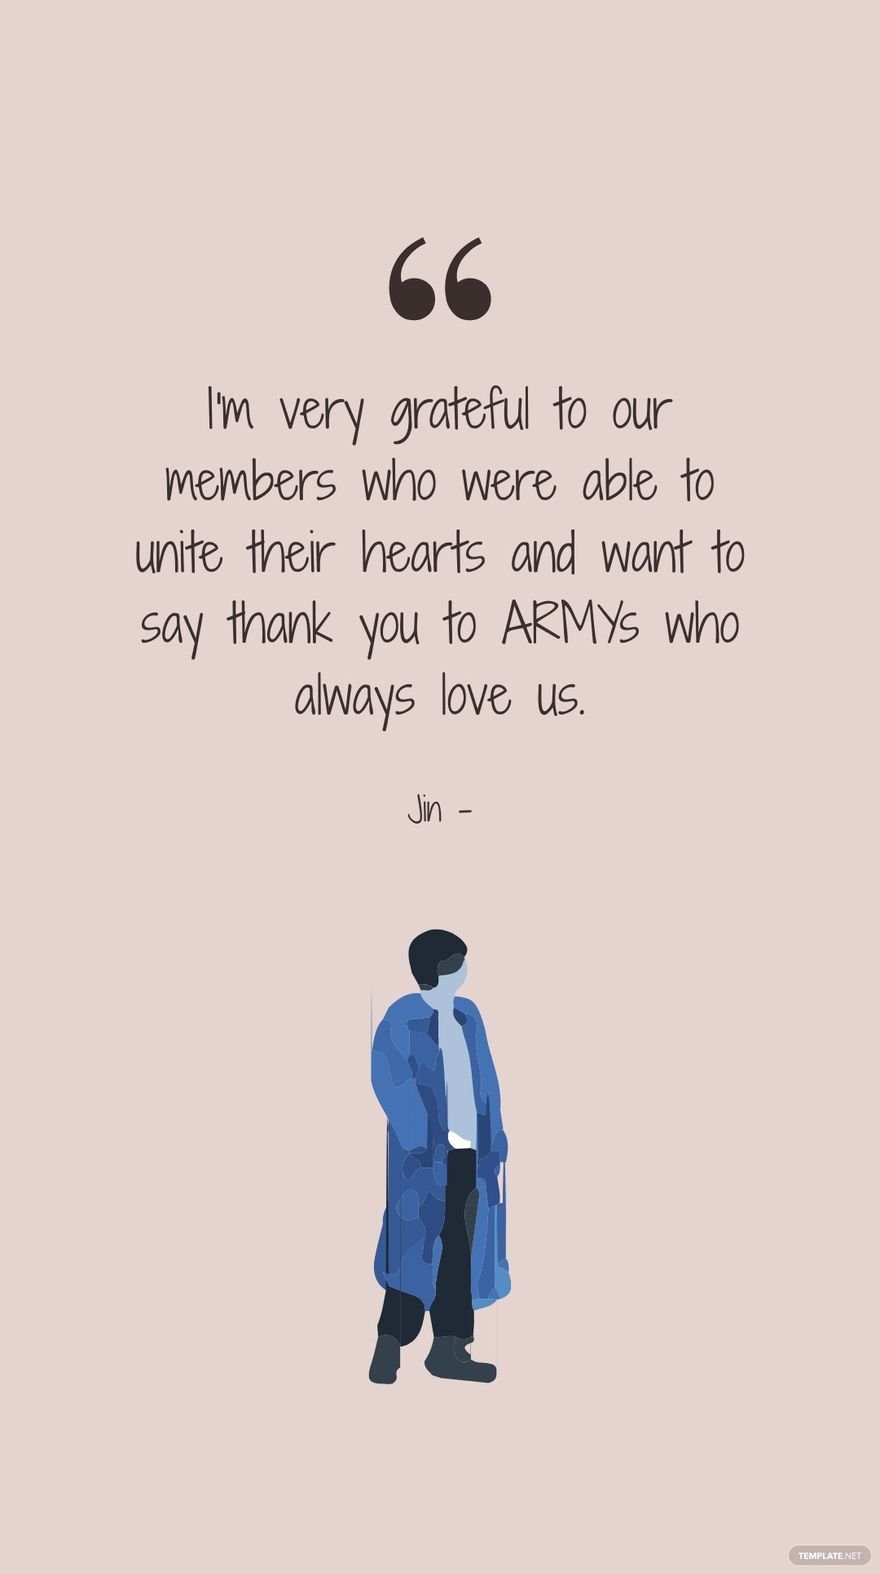 Jin - I'm very grateful to our members who were able to unite their hearts and want to say thank you to ARMYs who always love us.